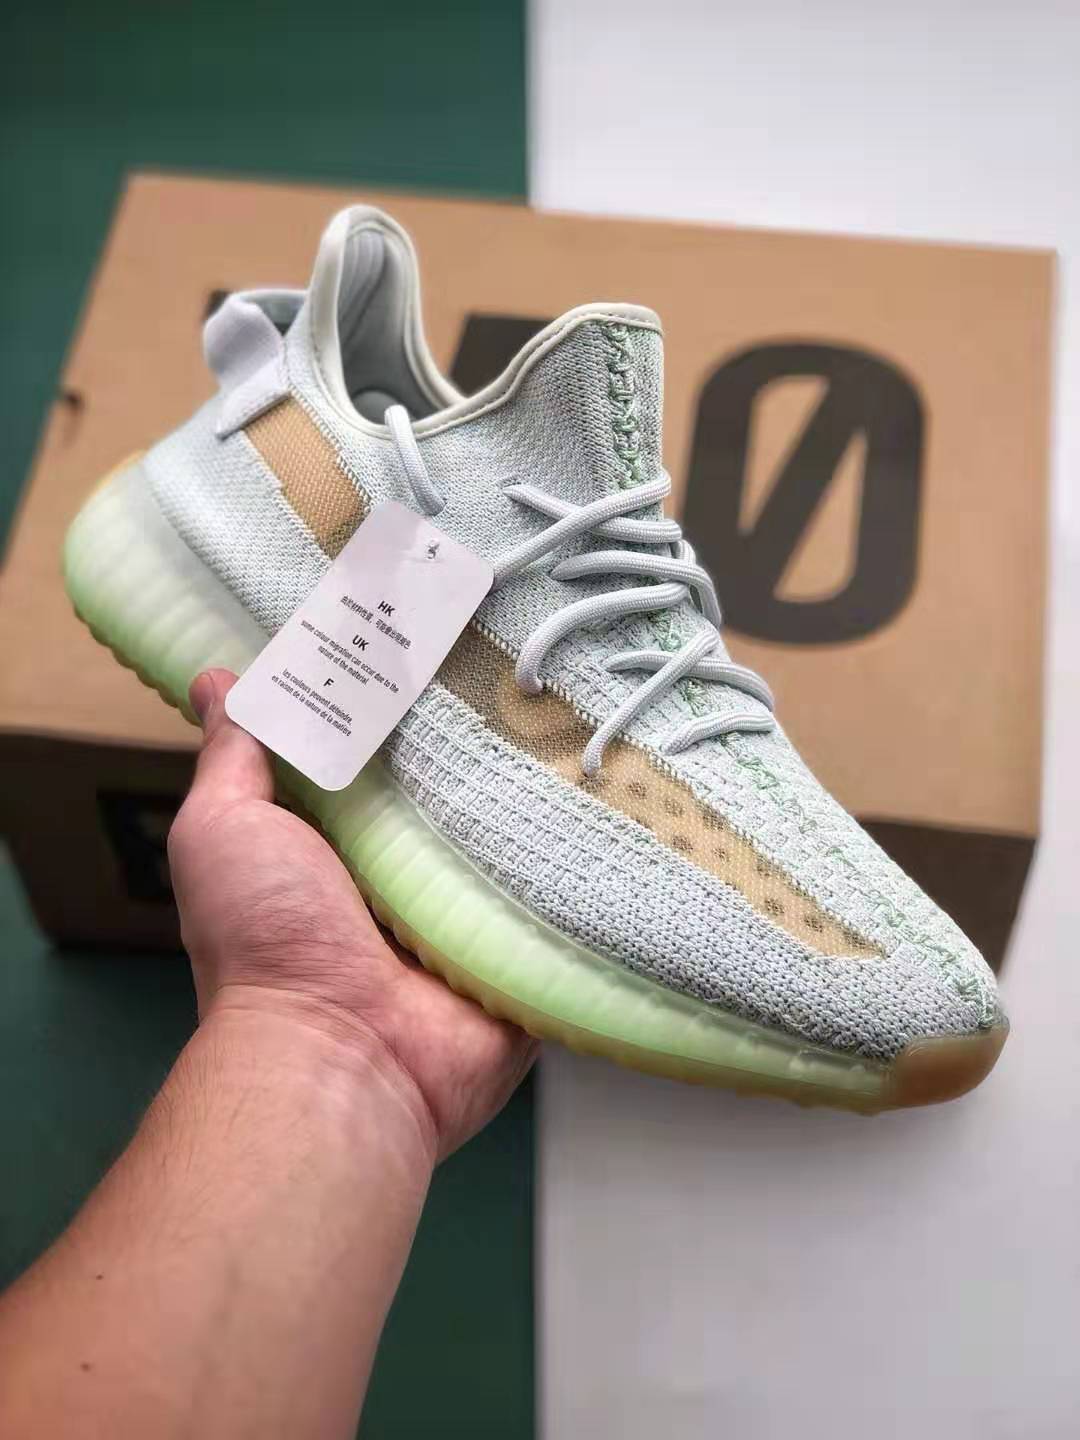 Adidas Yeezy Boost 350 V2 'Hyperspace' EG7491 - Limited Edition Release